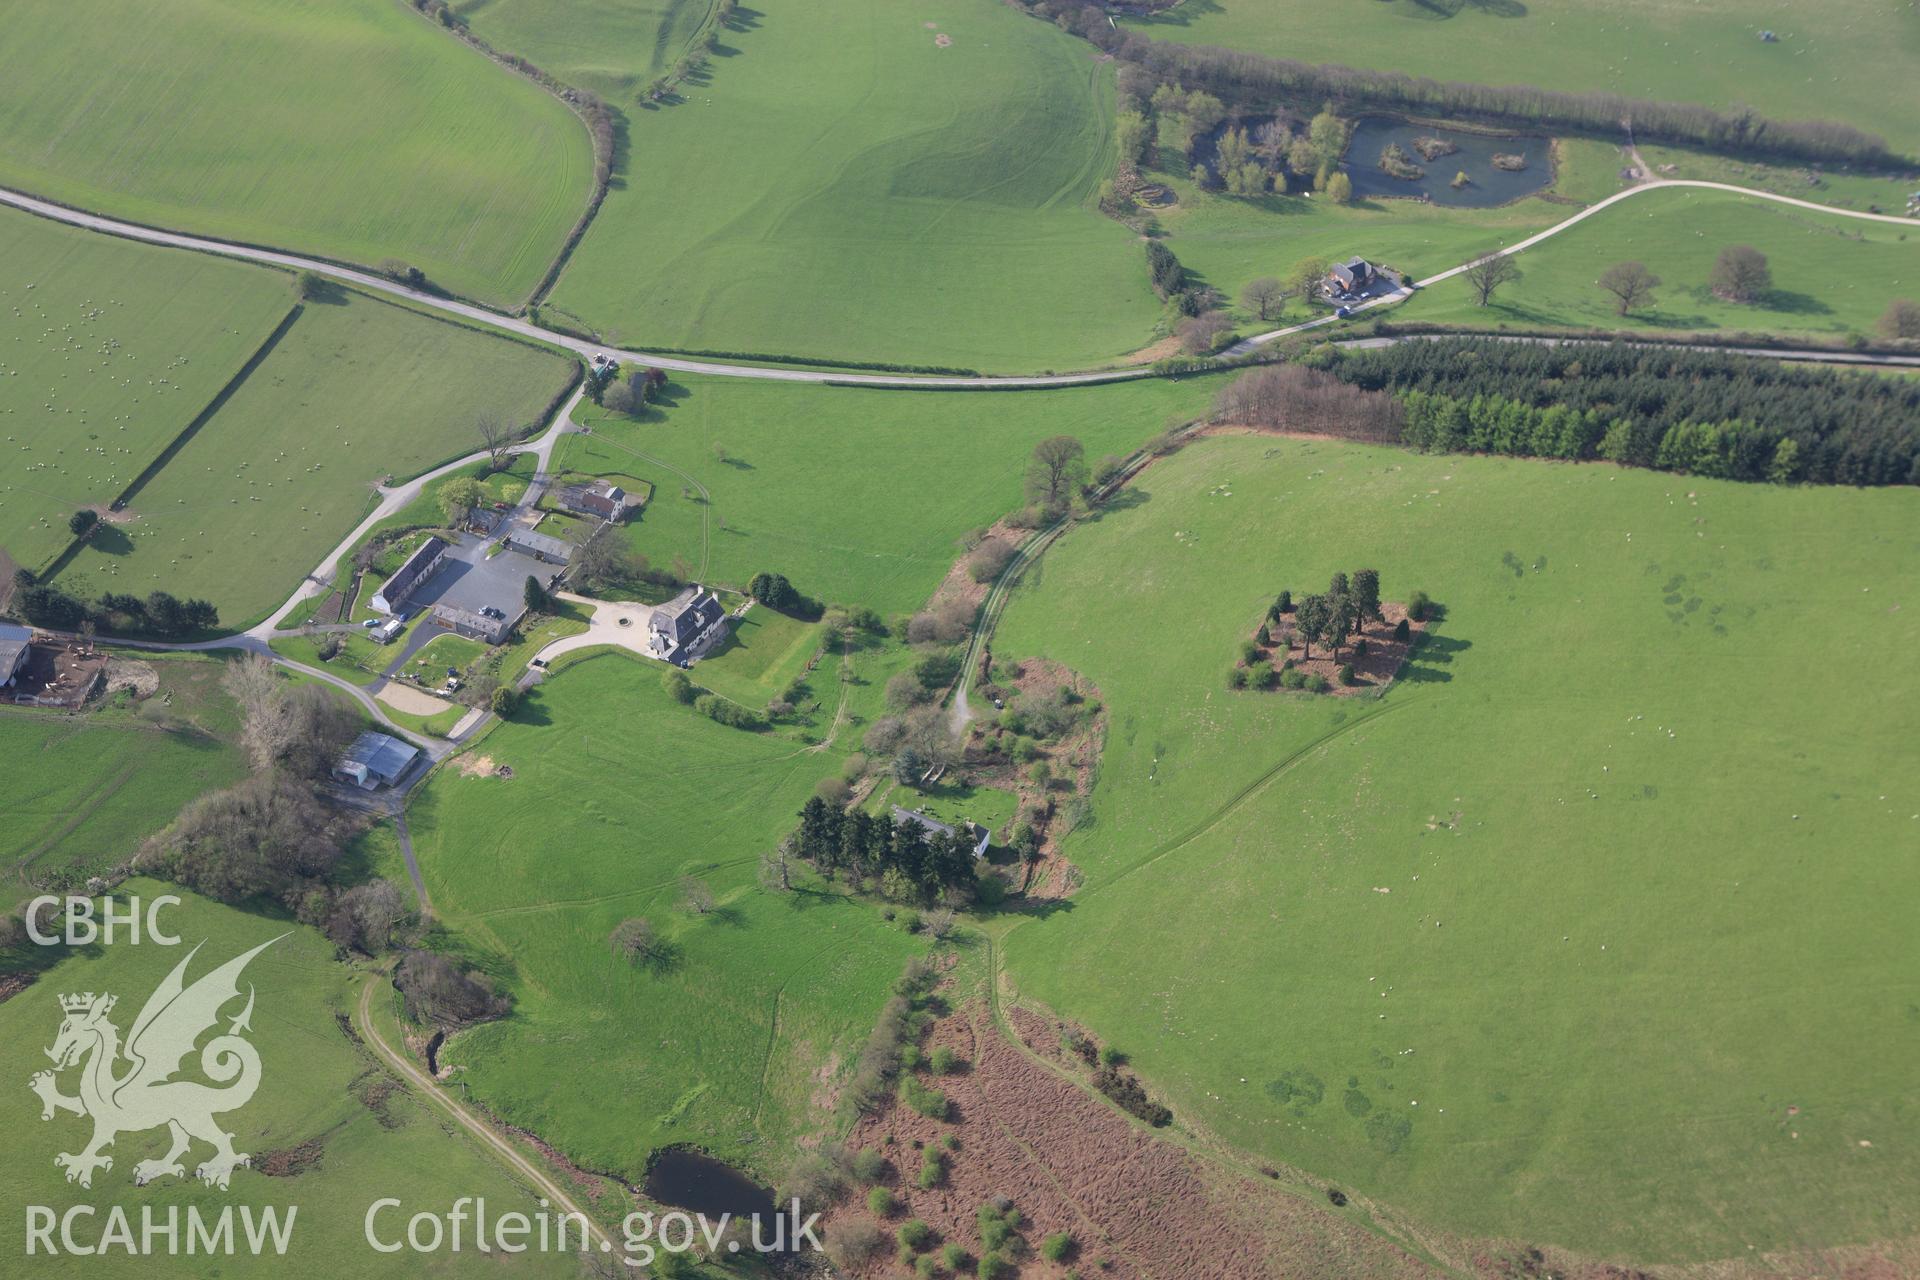 RCAHMW colour oblique aerial photograph of the site of the Battle of Pilleth. Taken on 21 April 2009 by Toby Driver